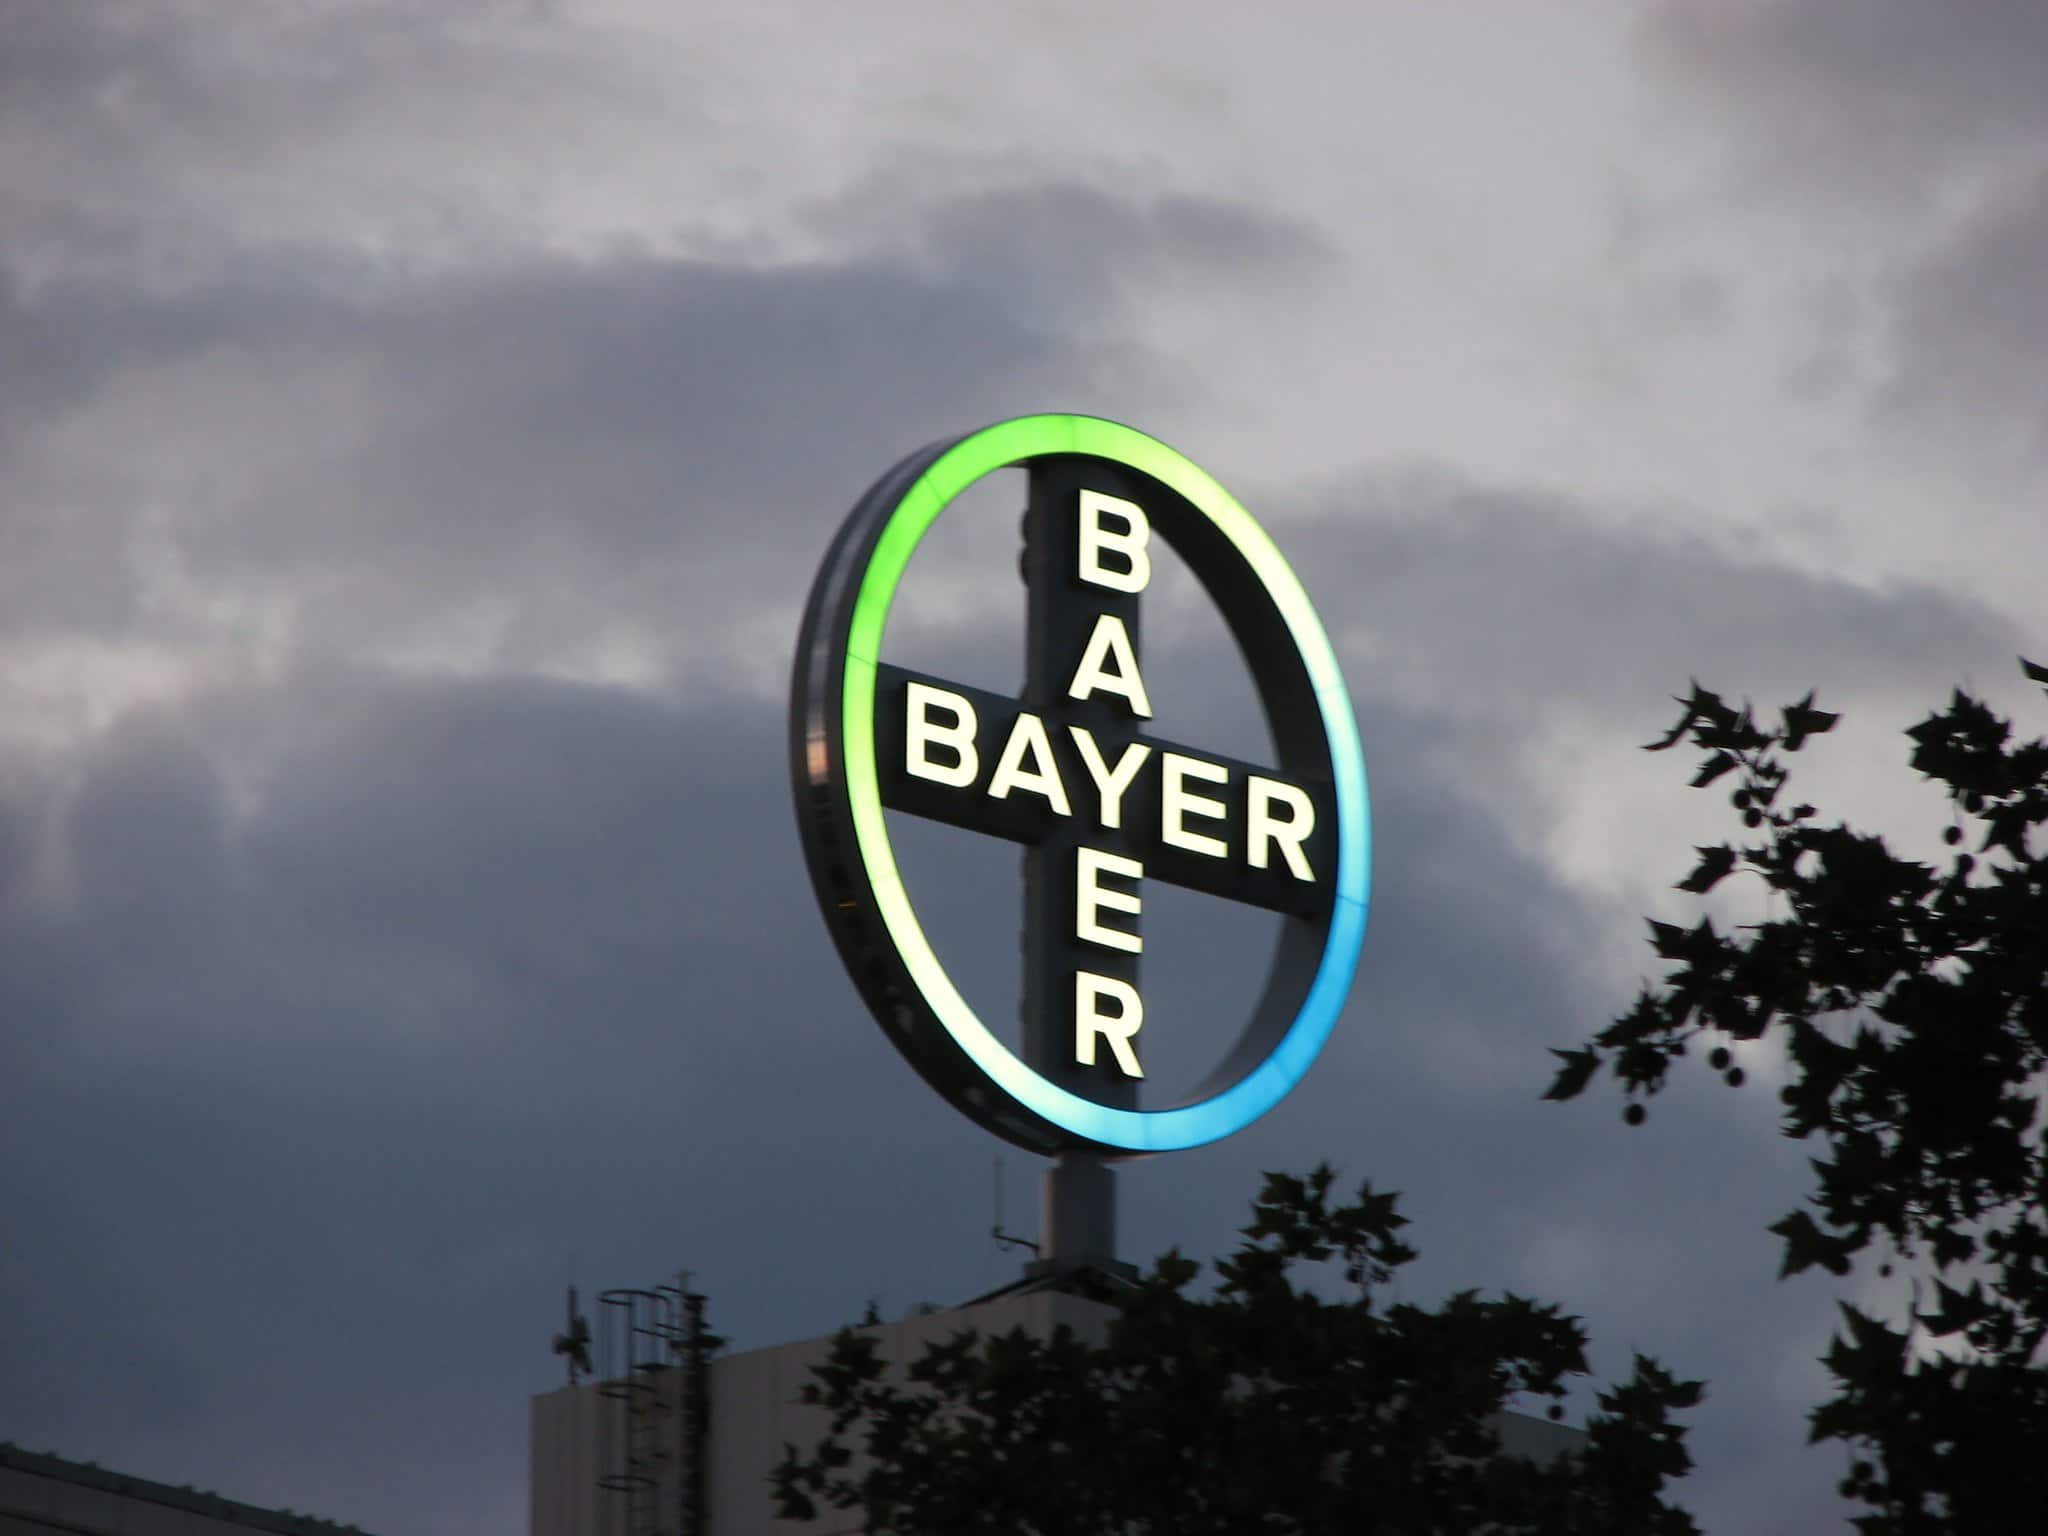 Following $10 billion Roundup settlement, Bayer uses climate program as front to lock in control of farmer data and sell more Roundup